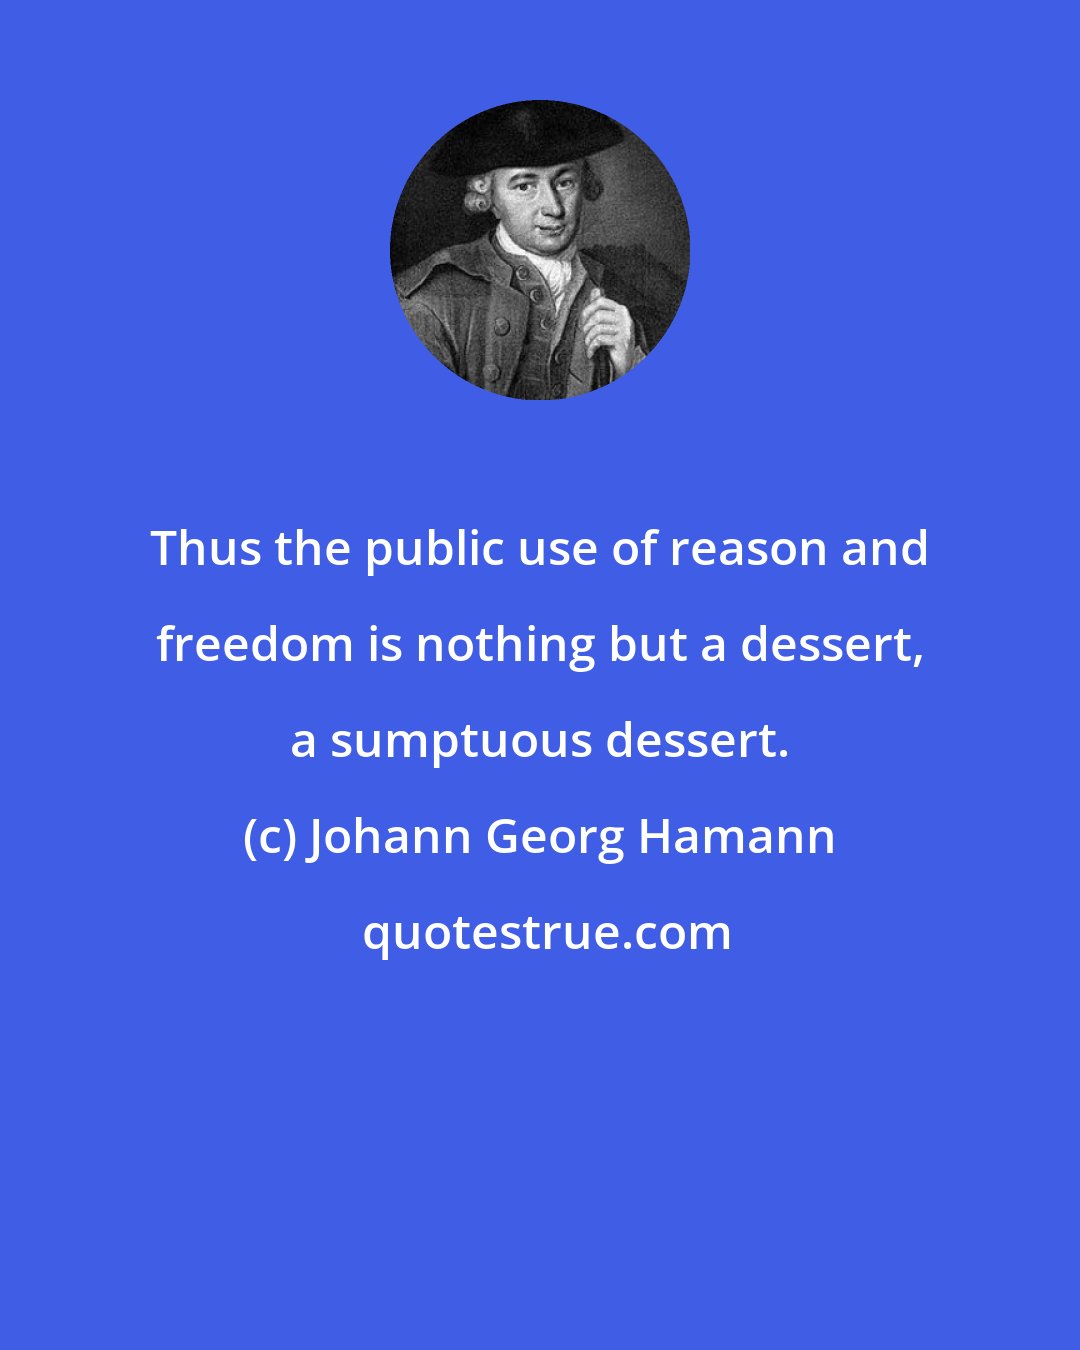 Johann Georg Hamann: Thus the public use of reason and freedom is nothing but a dessert, a sumptuous dessert.